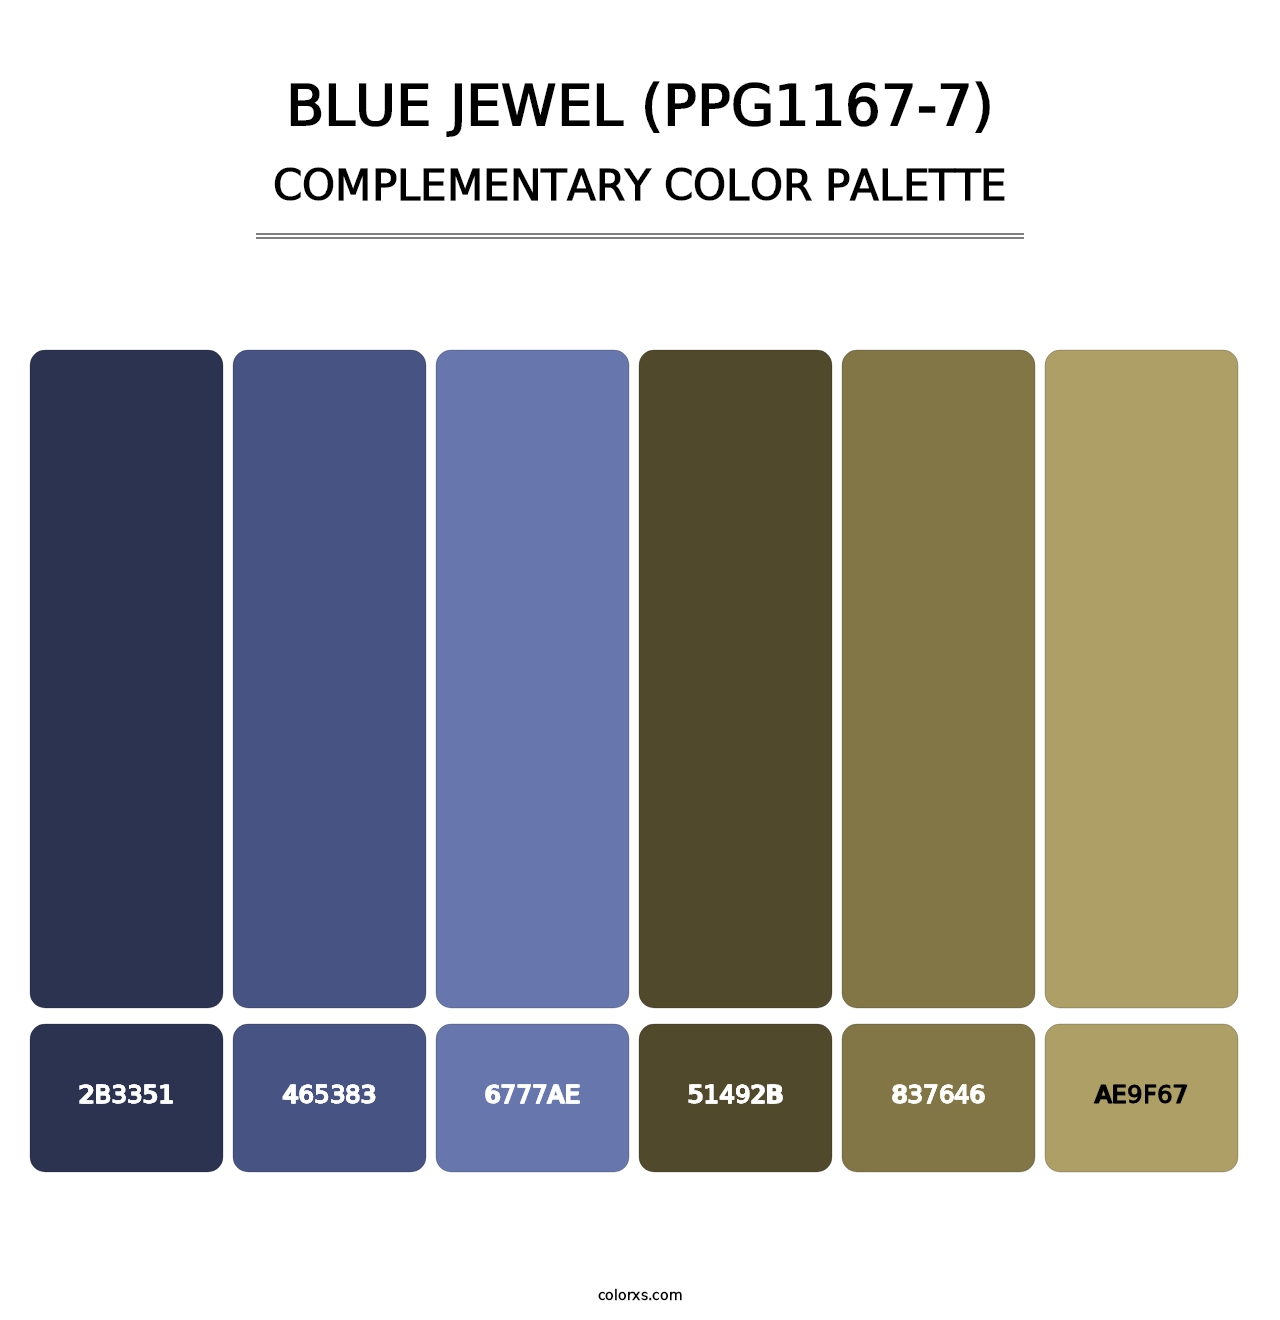 Blue Jewel (PPG1167-7) - Complementary Color Palette